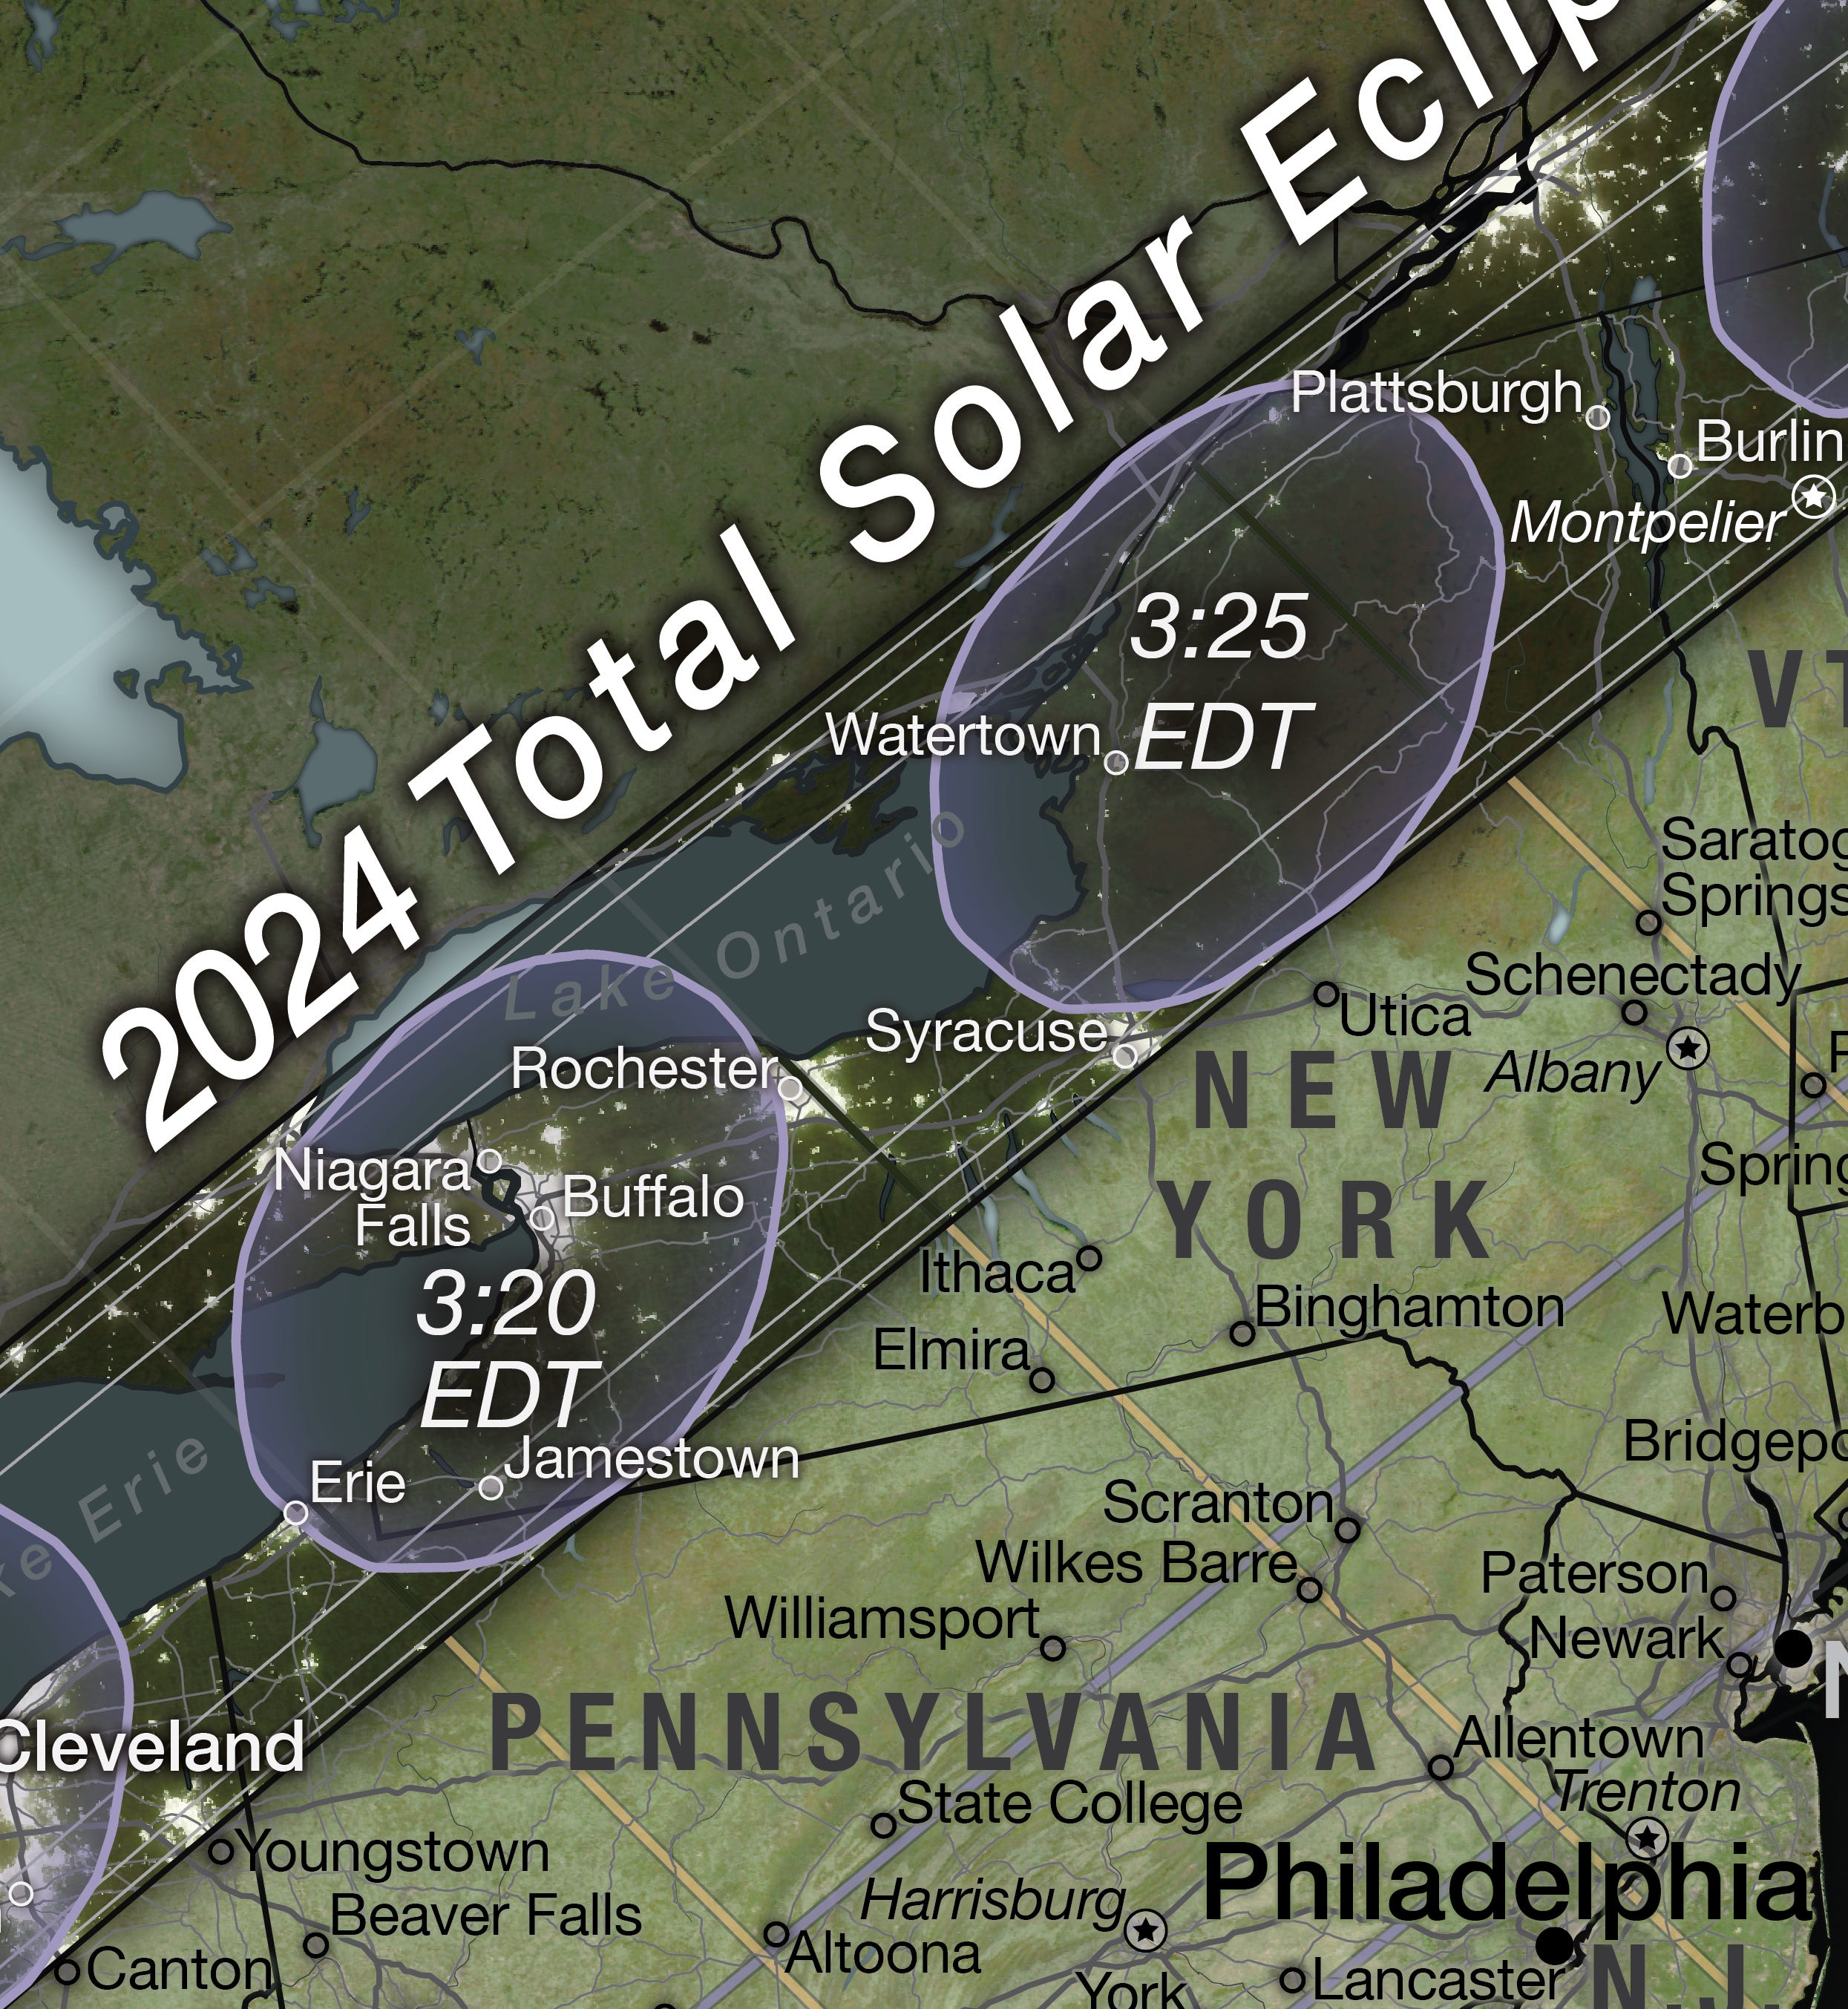 <p>Much of the northeast can get its eclipse fix by driving to upstate New York. Niagara Falls, Buffalo, and Syracuse are all in the path of totality.</p>